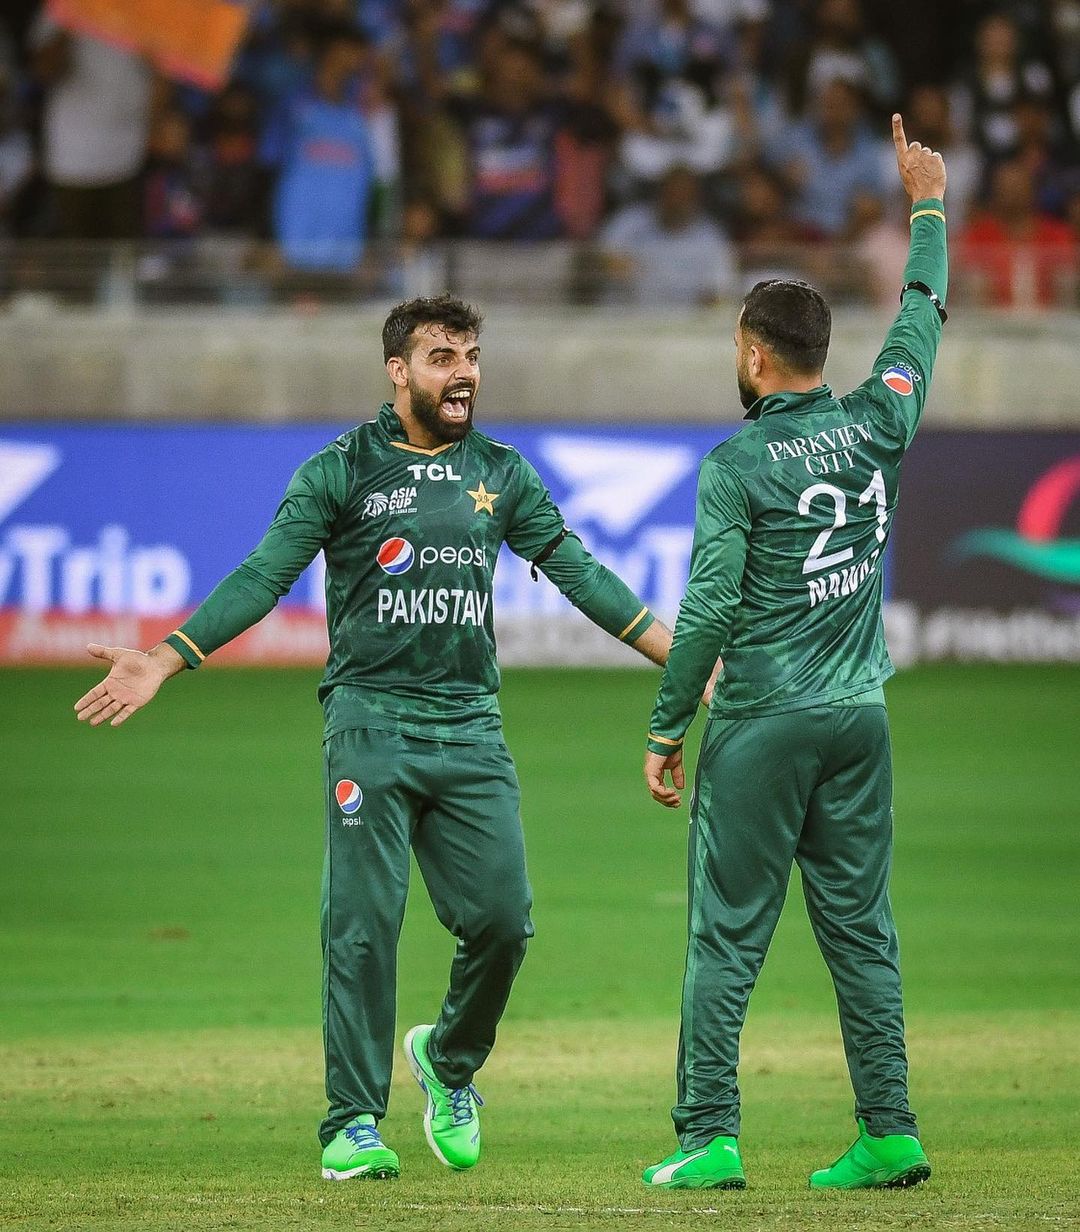 A Fan Proposes to Shadab Khan